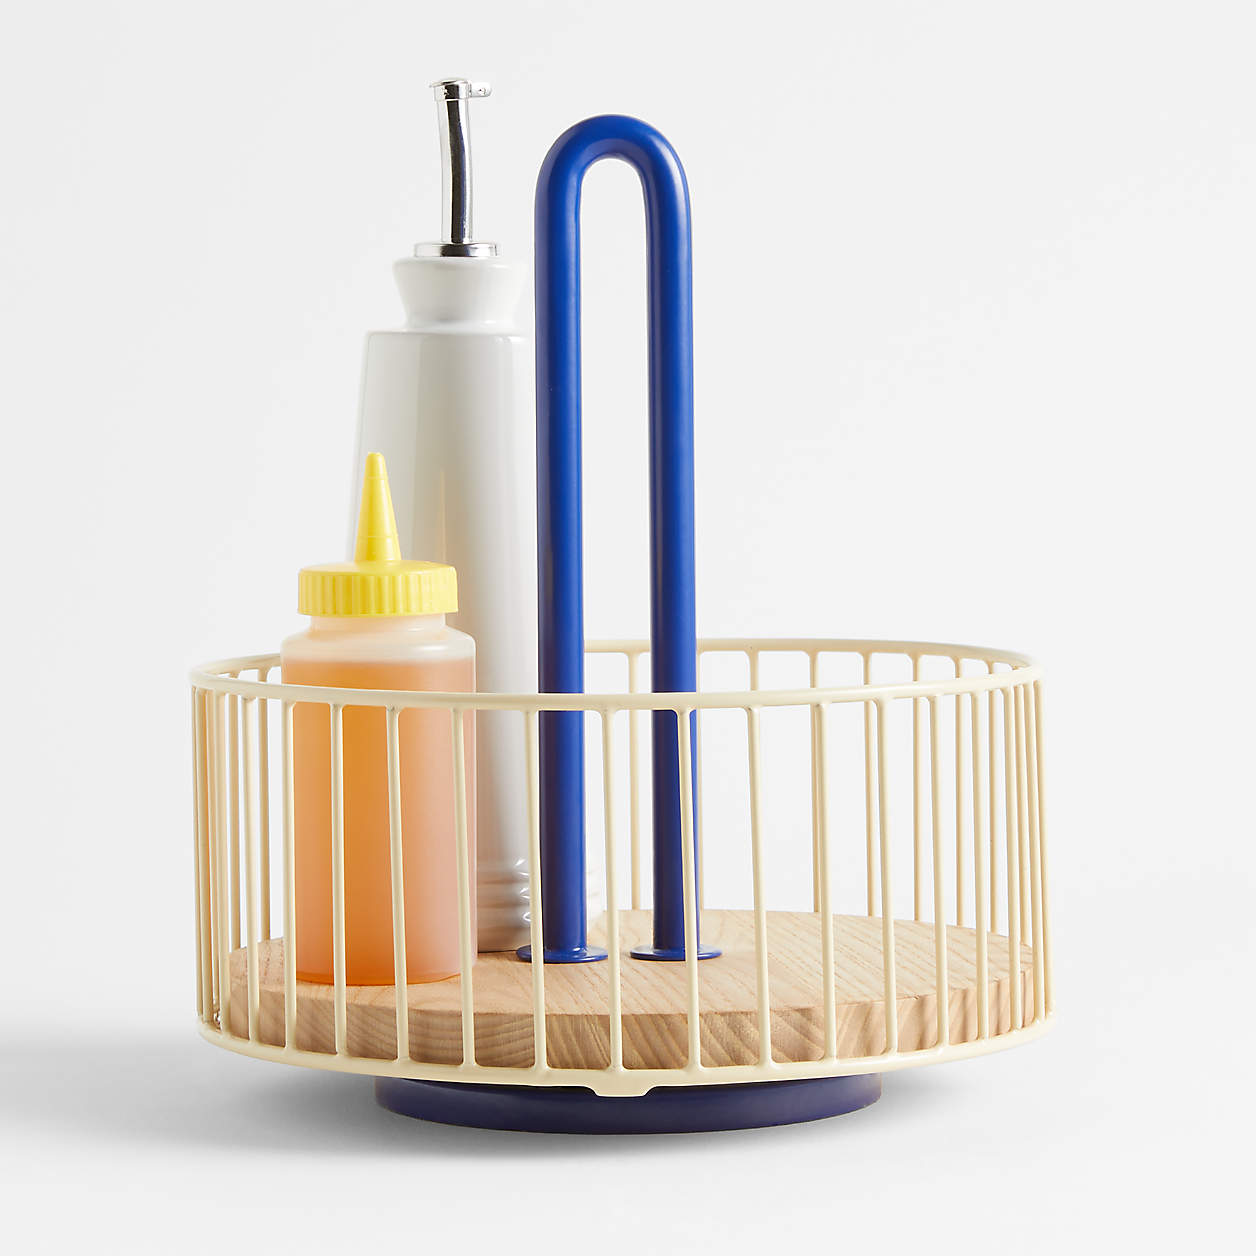 Rotating Condiment Caddy by Molly Baz - Molly Baz Collection at Crate & Barrel
